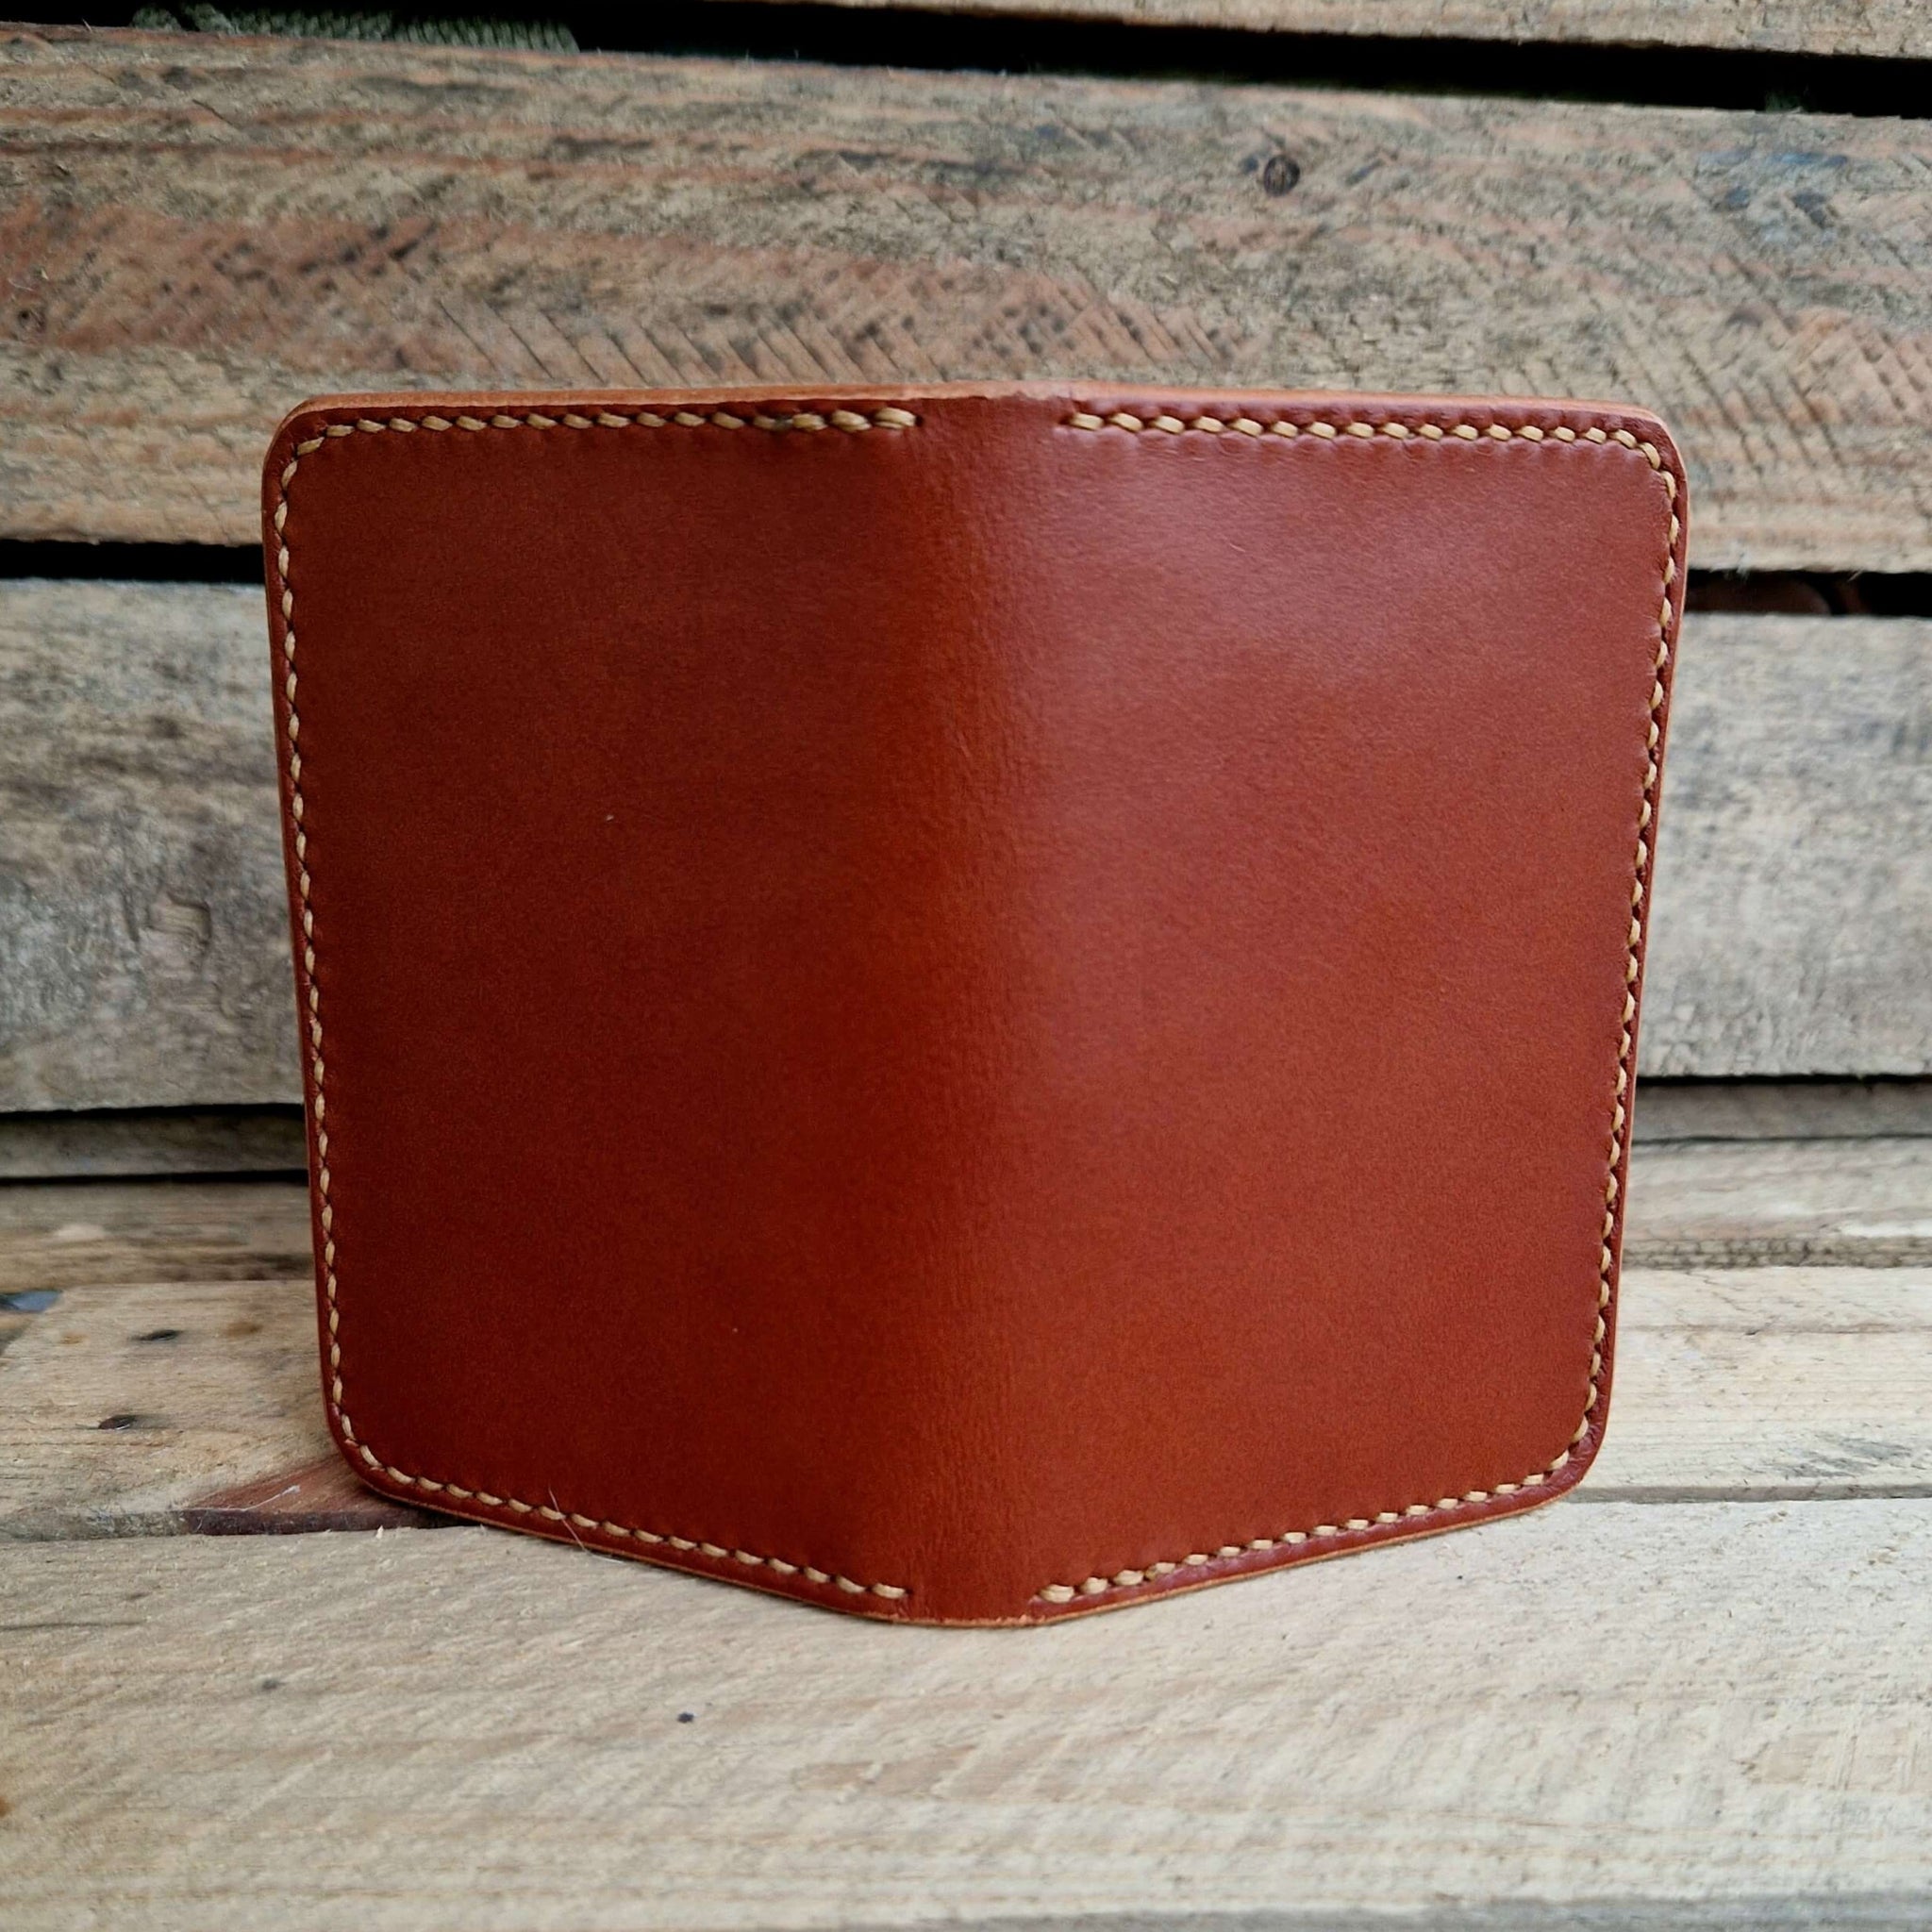 Hand stitched tan brown leather card holder or wallet